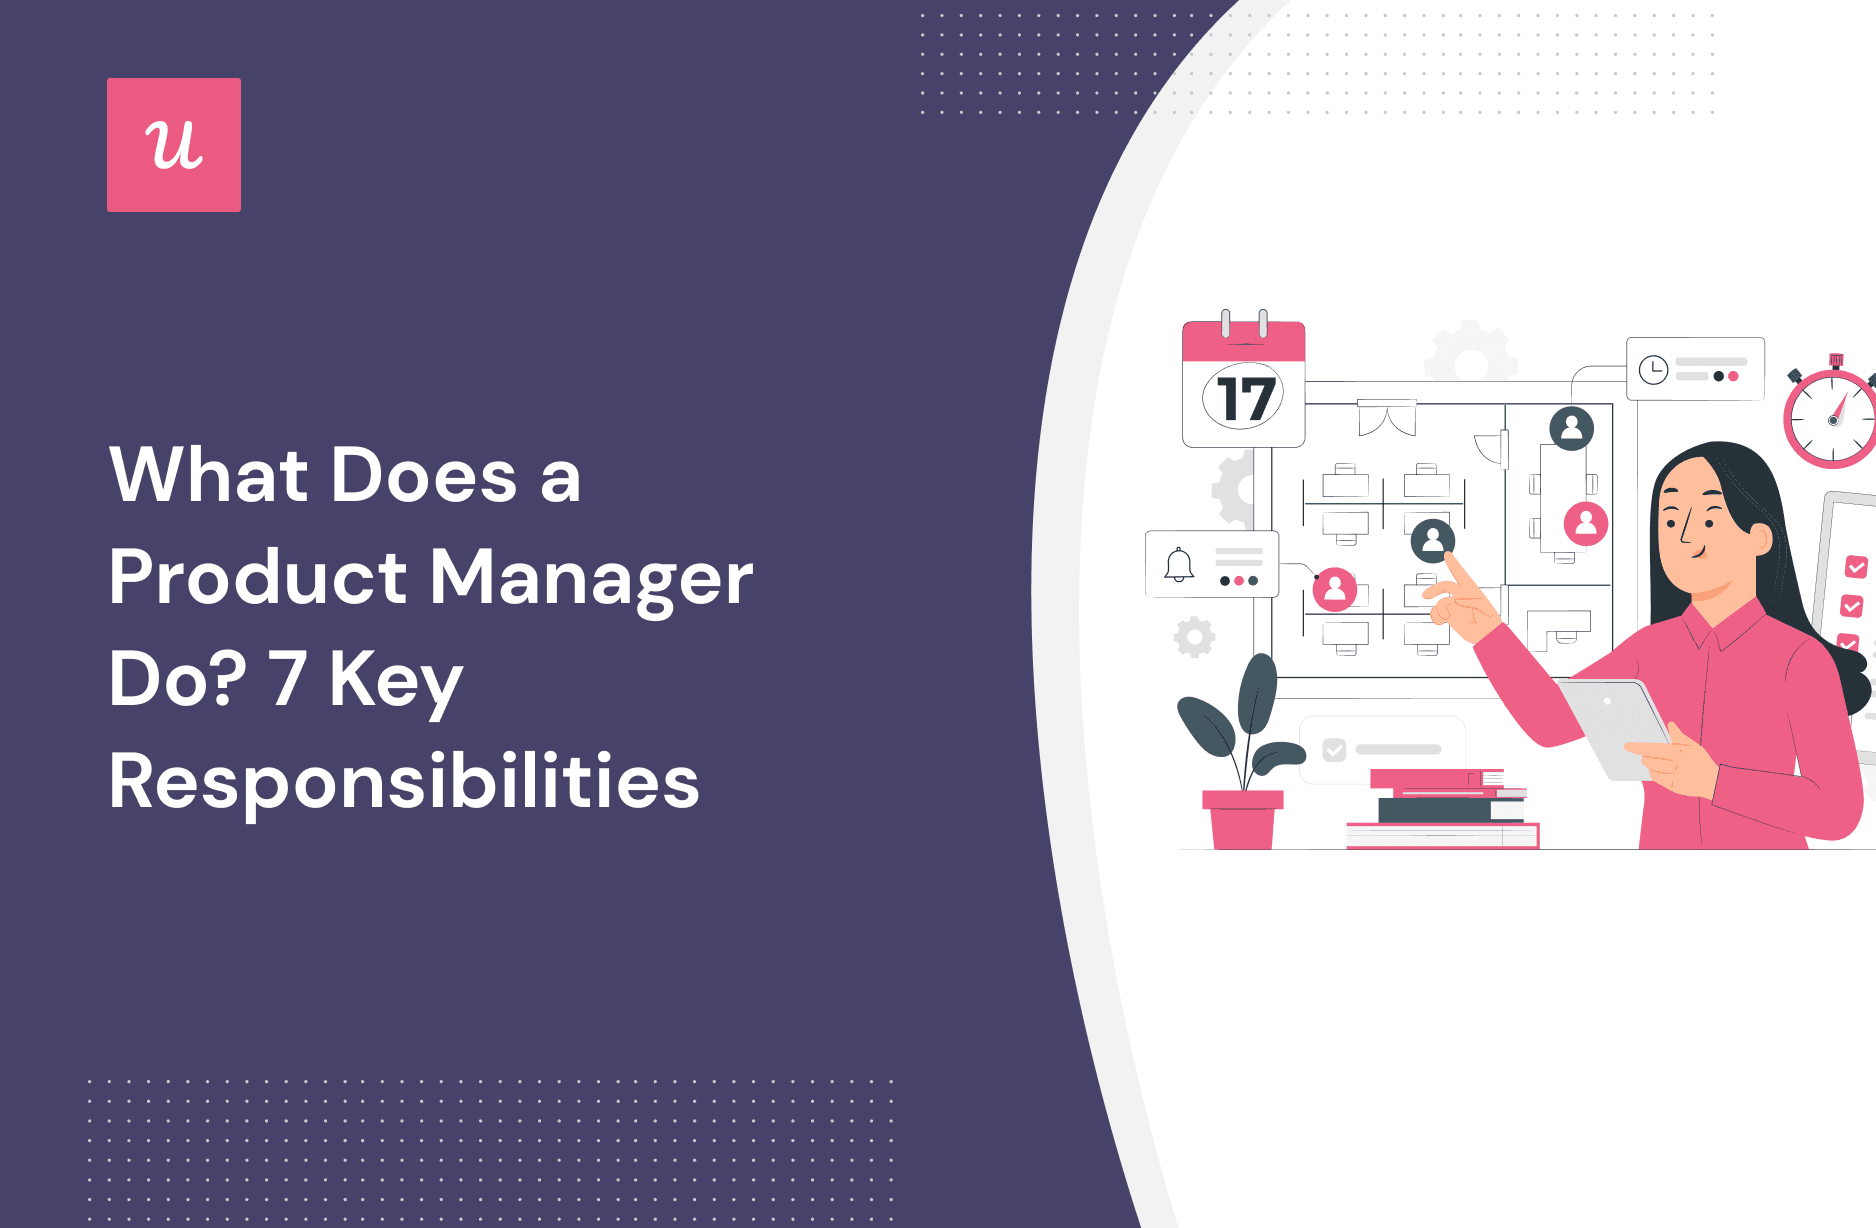 What Does a Product Manager Do? 7 Key Responsibilities cover